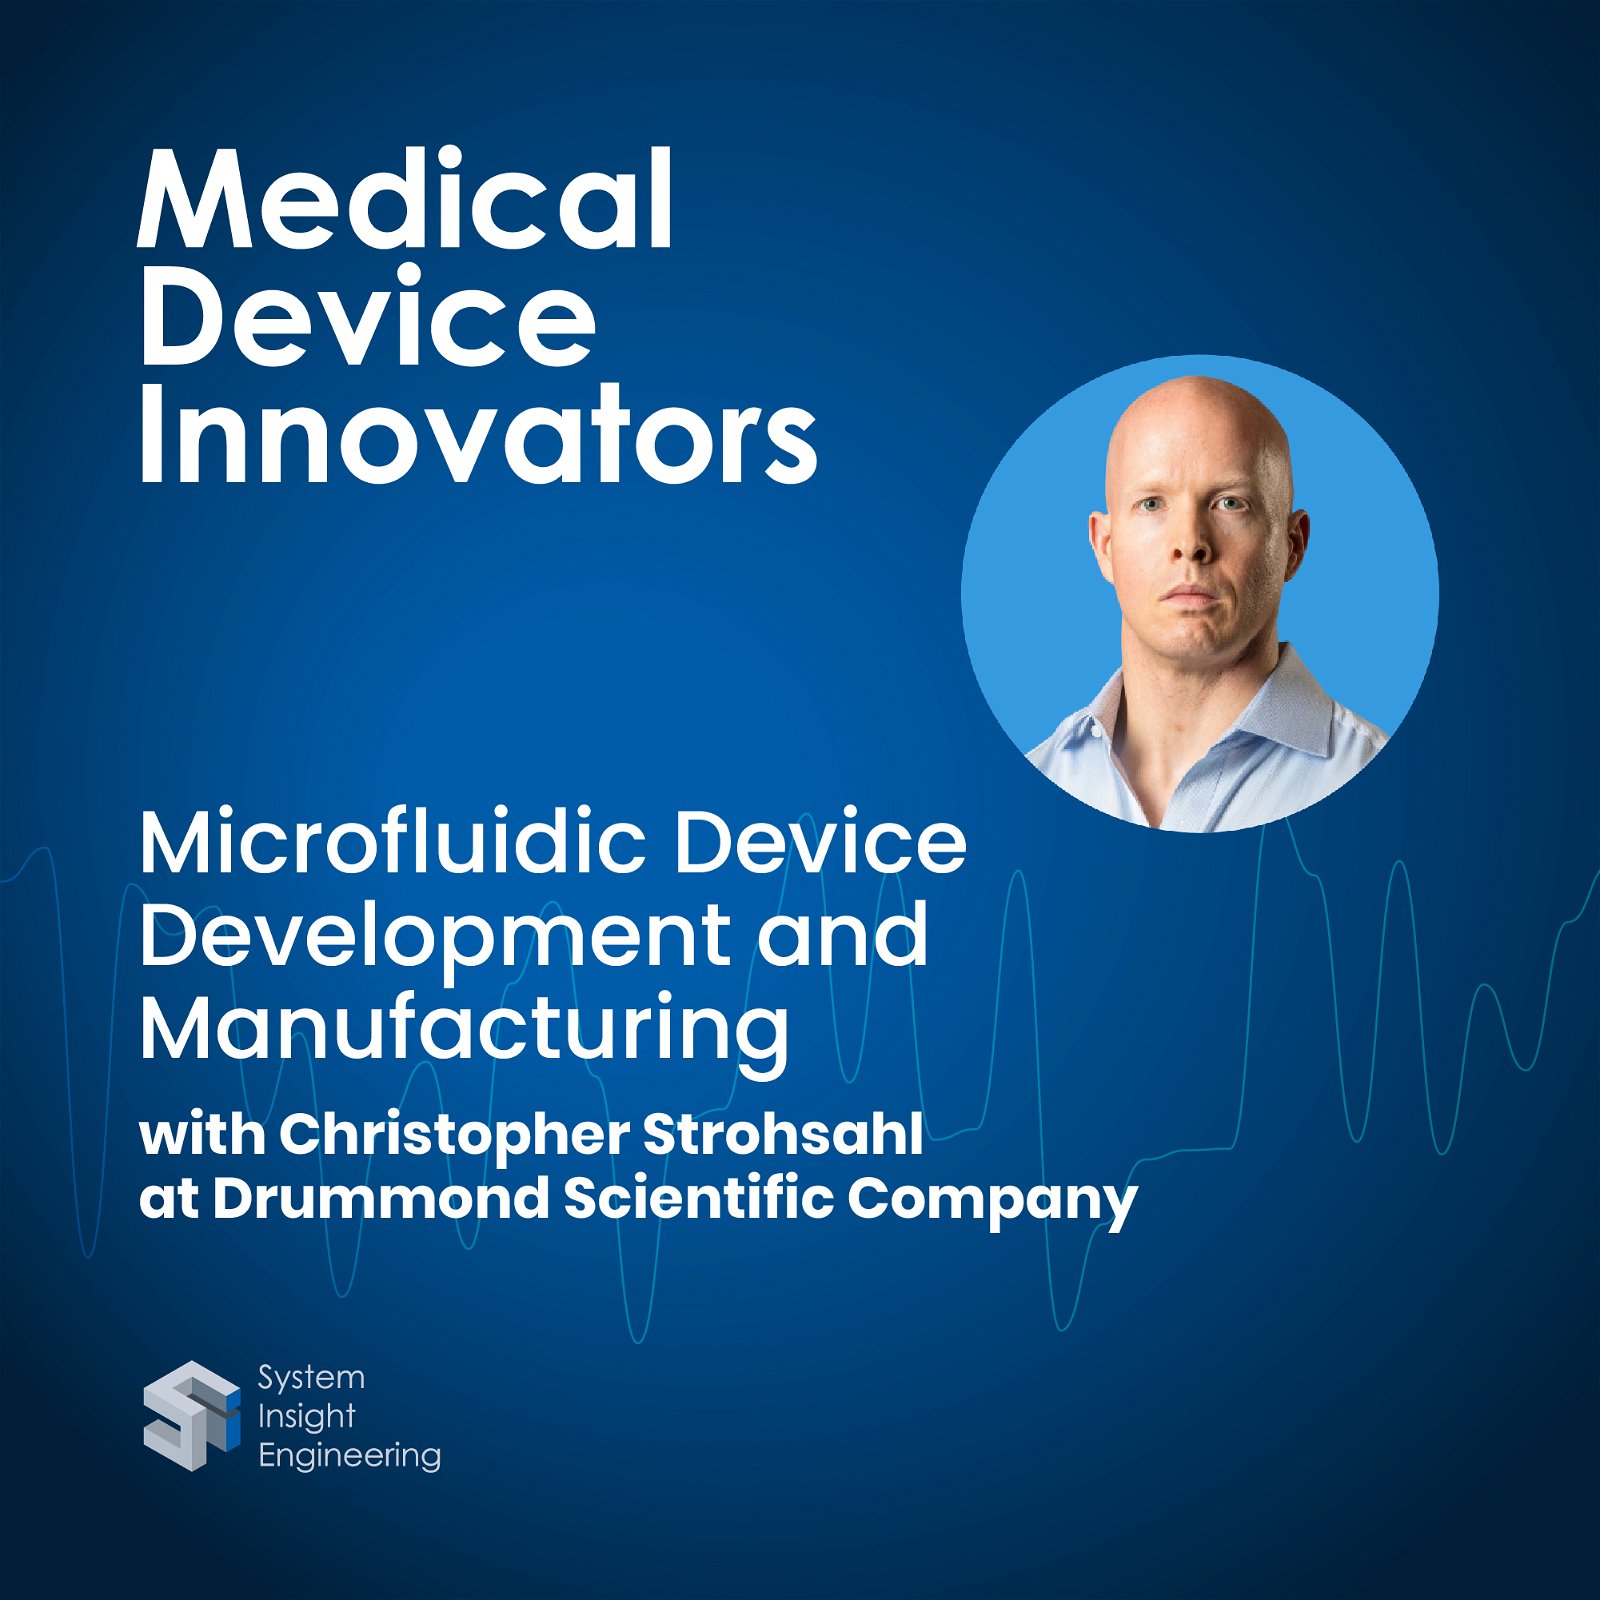 Microfluidic Device Development and Manufacturing with Christopher Strohsahl at Drummond Scientific Company